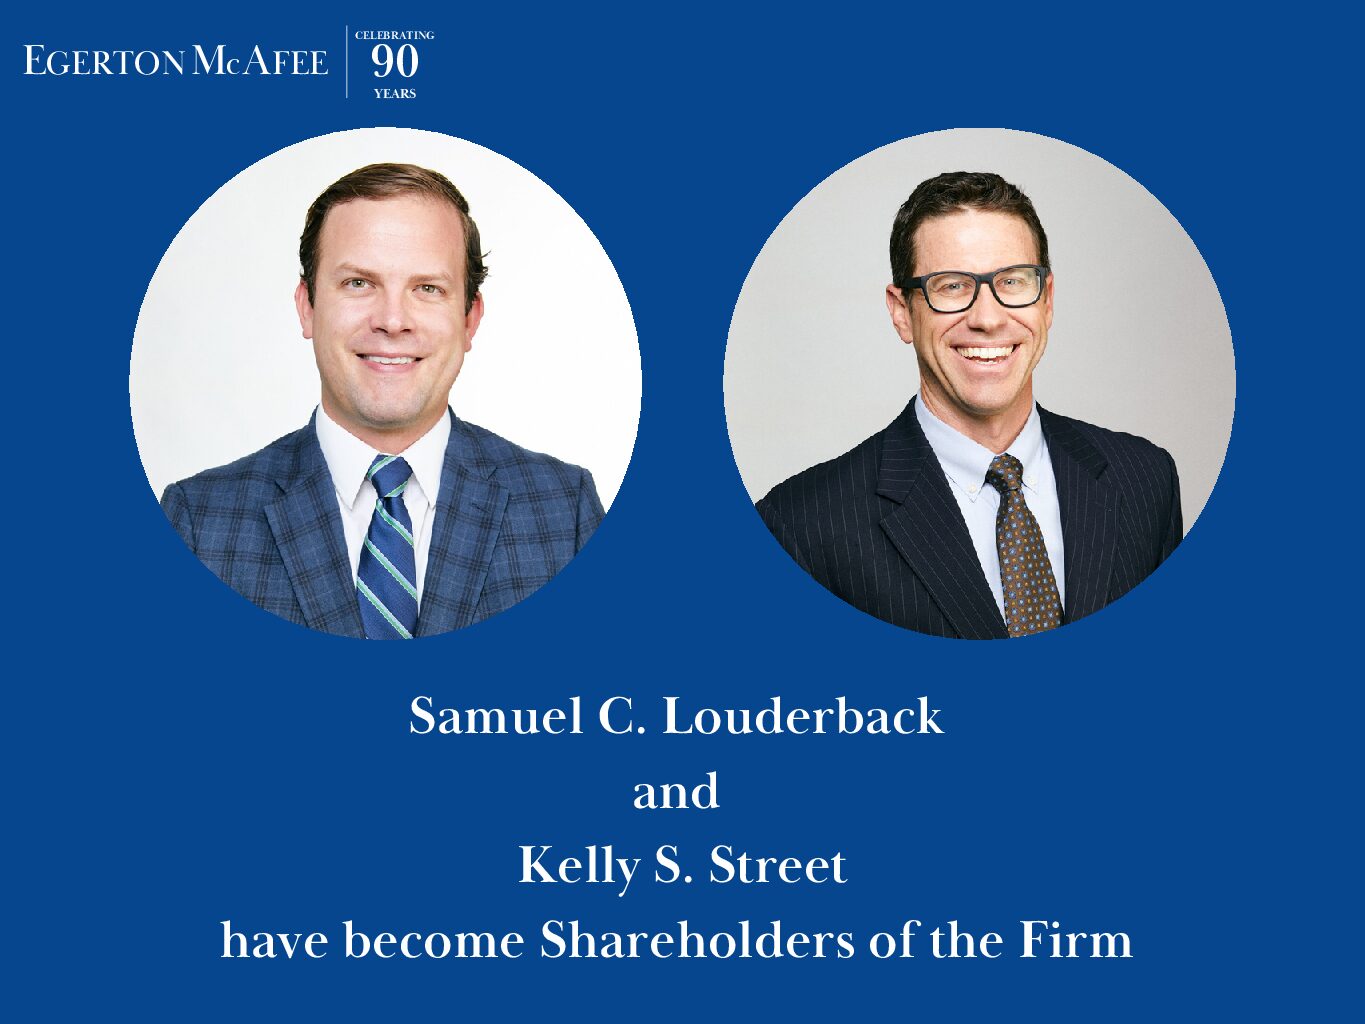 Samuel C. Louderback and Kelly S. Street have become Shareholders